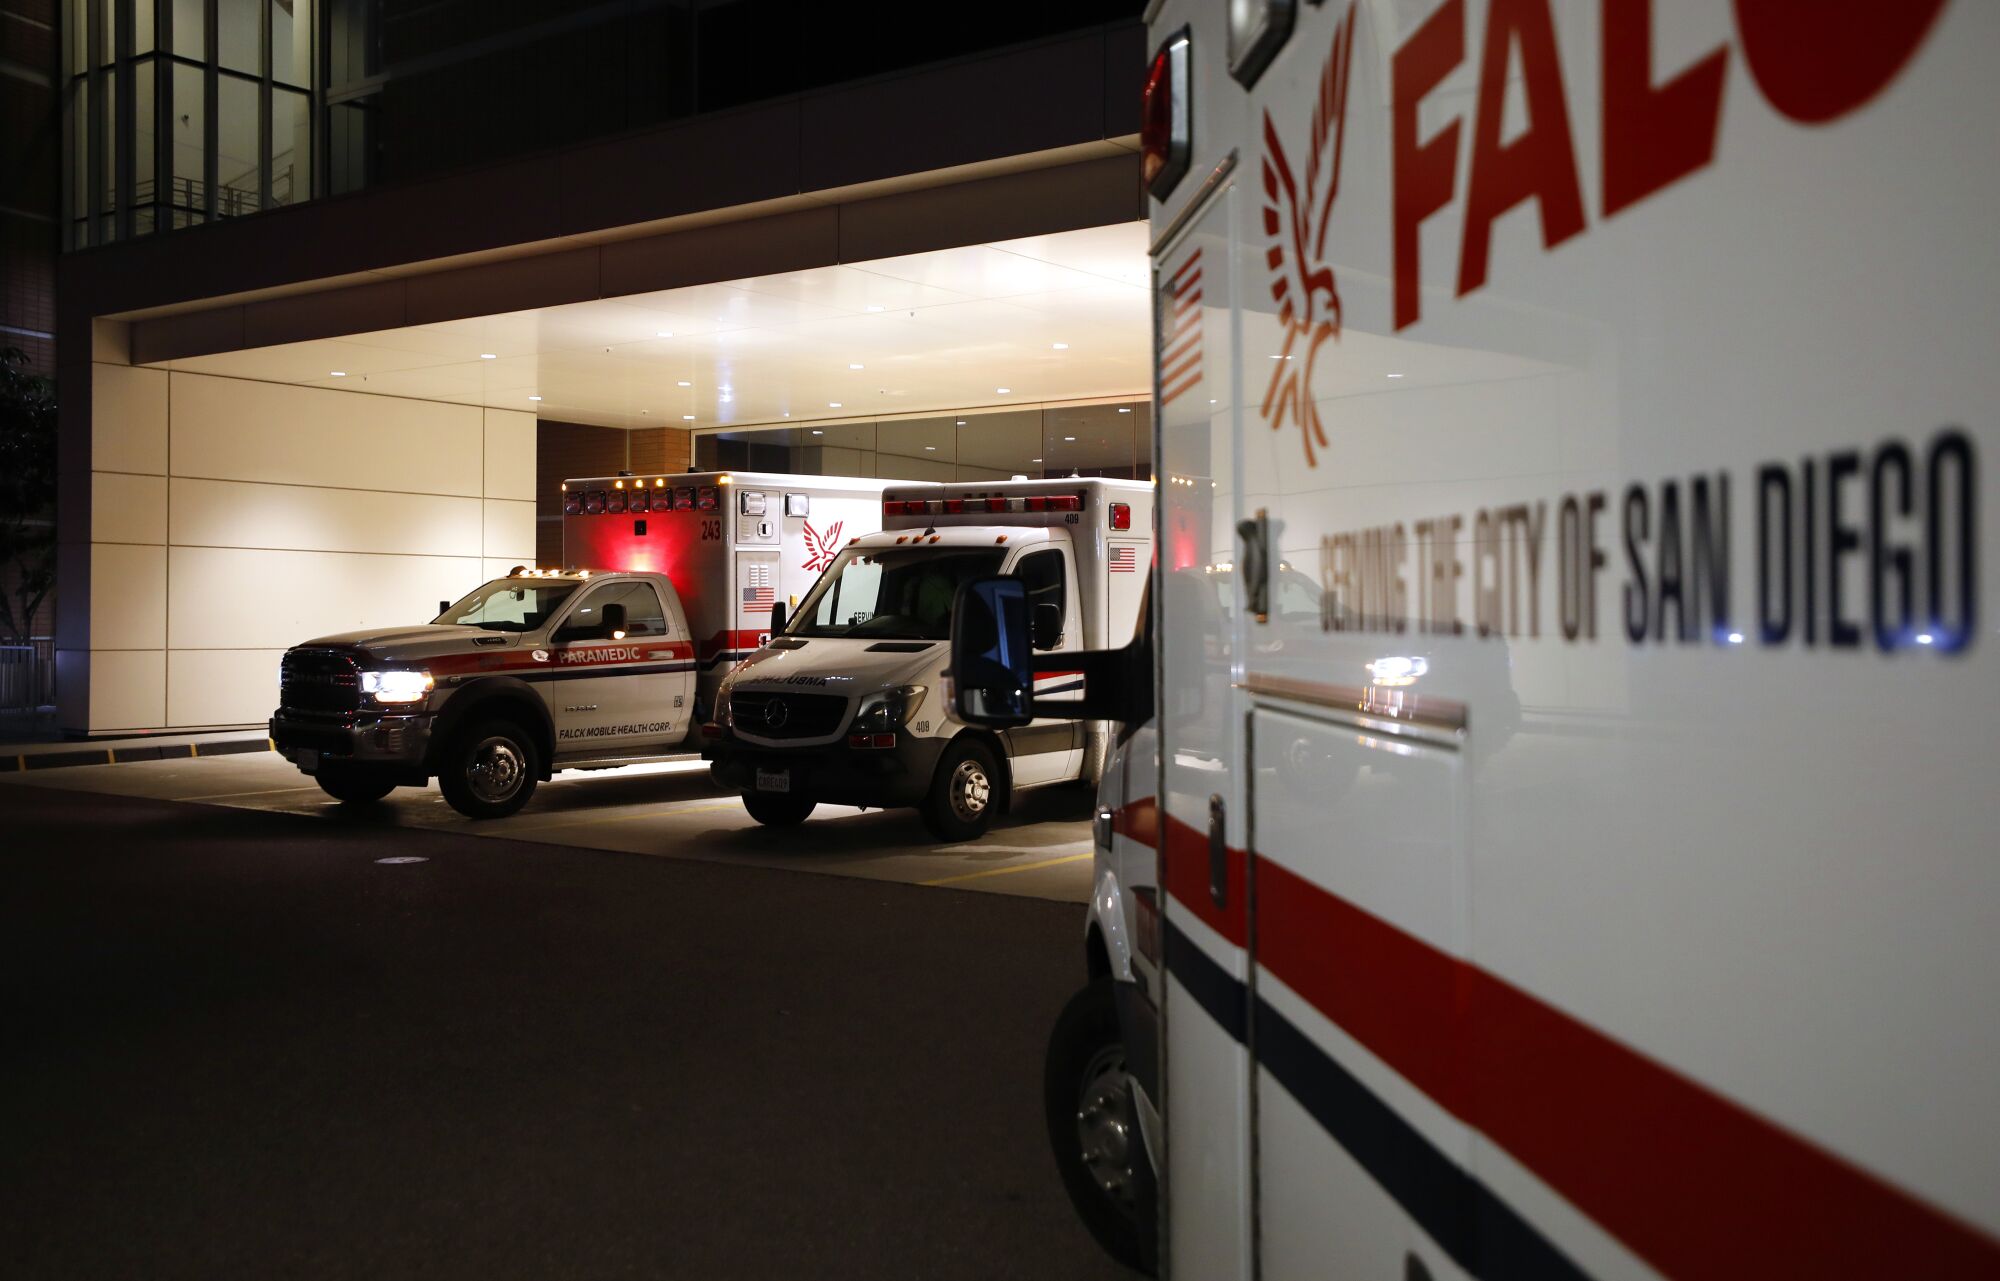 Ambulances are lined up at the emergency room at Scripps Memorial Hospital La Jolla on Monday.